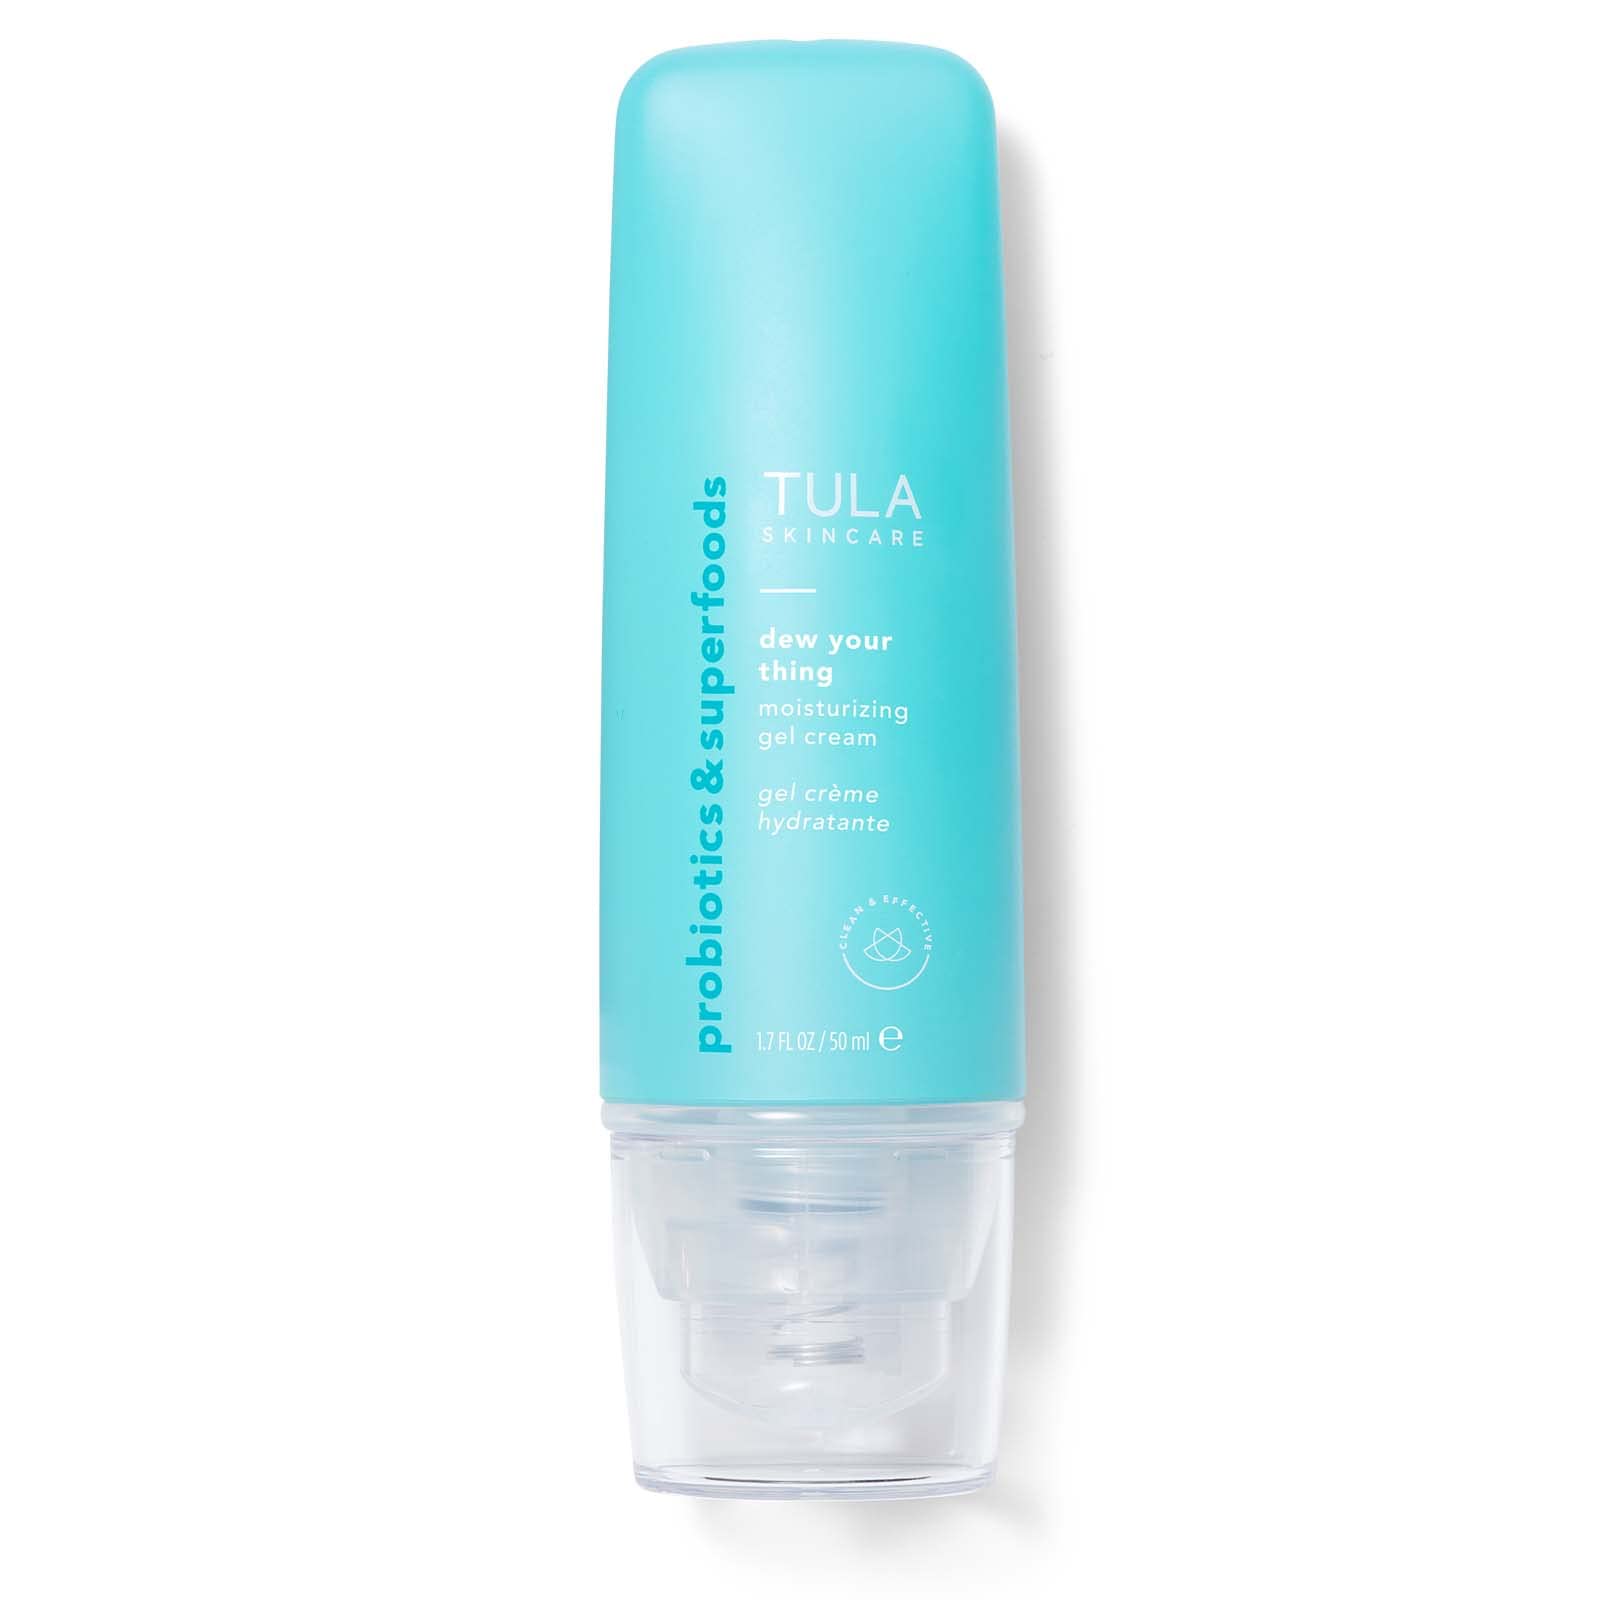 TULA Skin Care Dew Your Thing Moisturizing Gel Cream - Weightless Moisturizer for Face, Lightweight Water-Based Face Cream for Dewy Hydration, 1.7 oz.